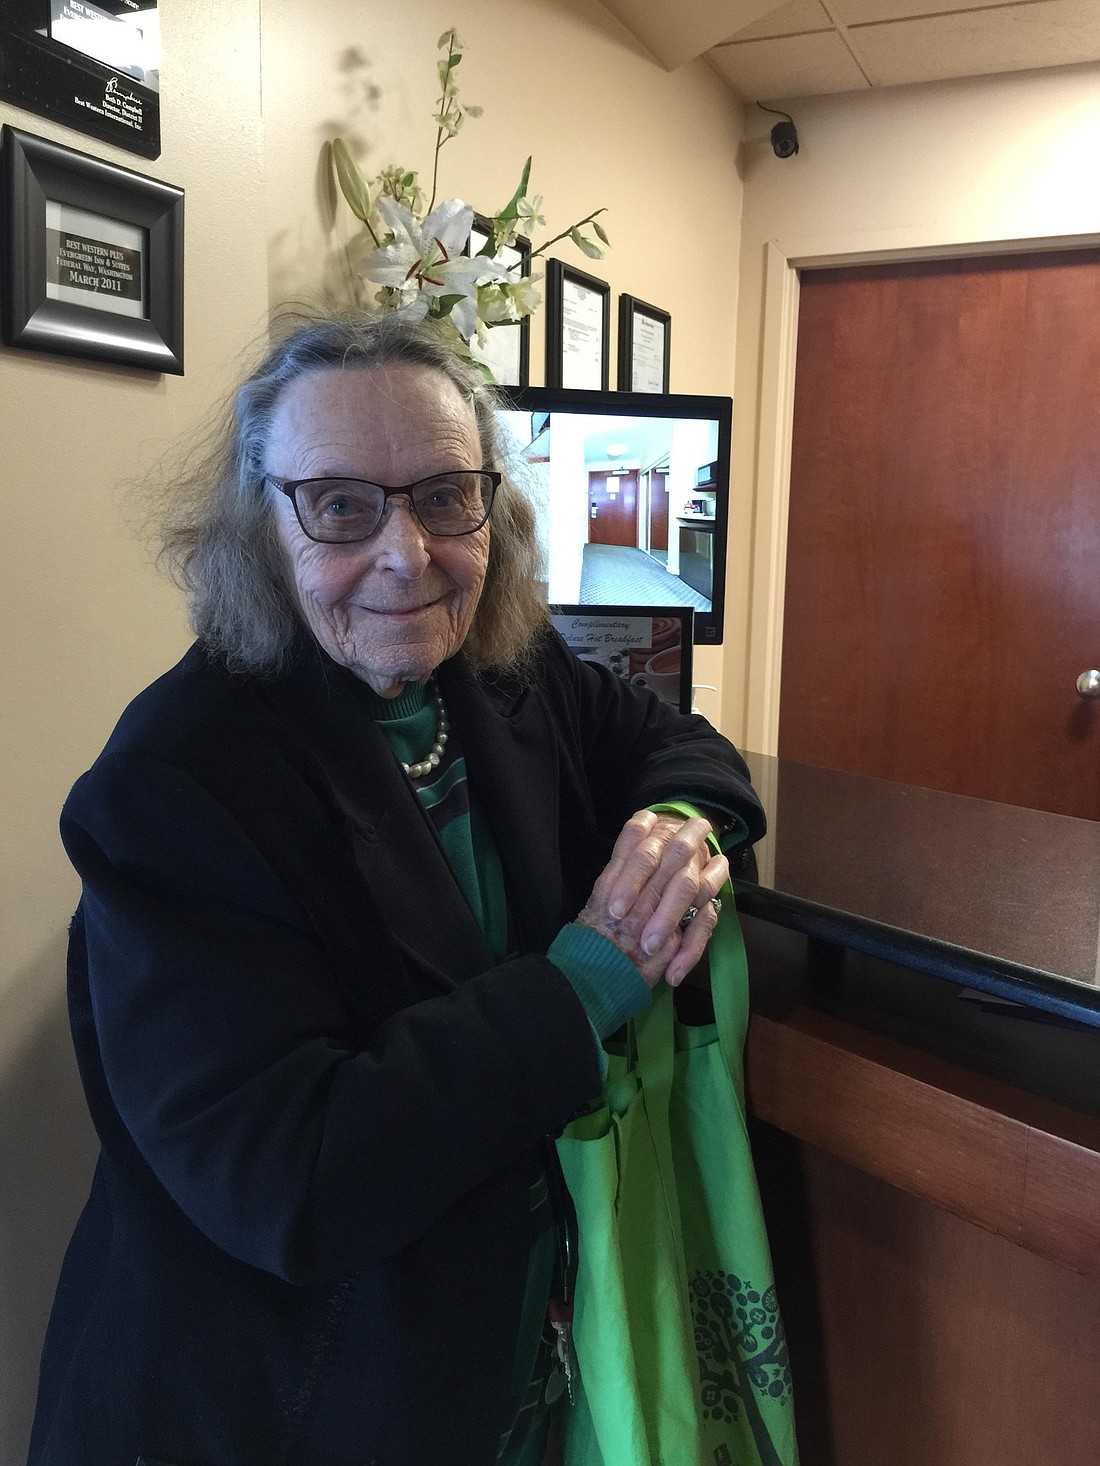 Miss Alice, as she's known, will turn 100 this month. She still works full-time as owner / manager at her
hotel, the Best Western Evergreen Inn & Suites in Federal Way